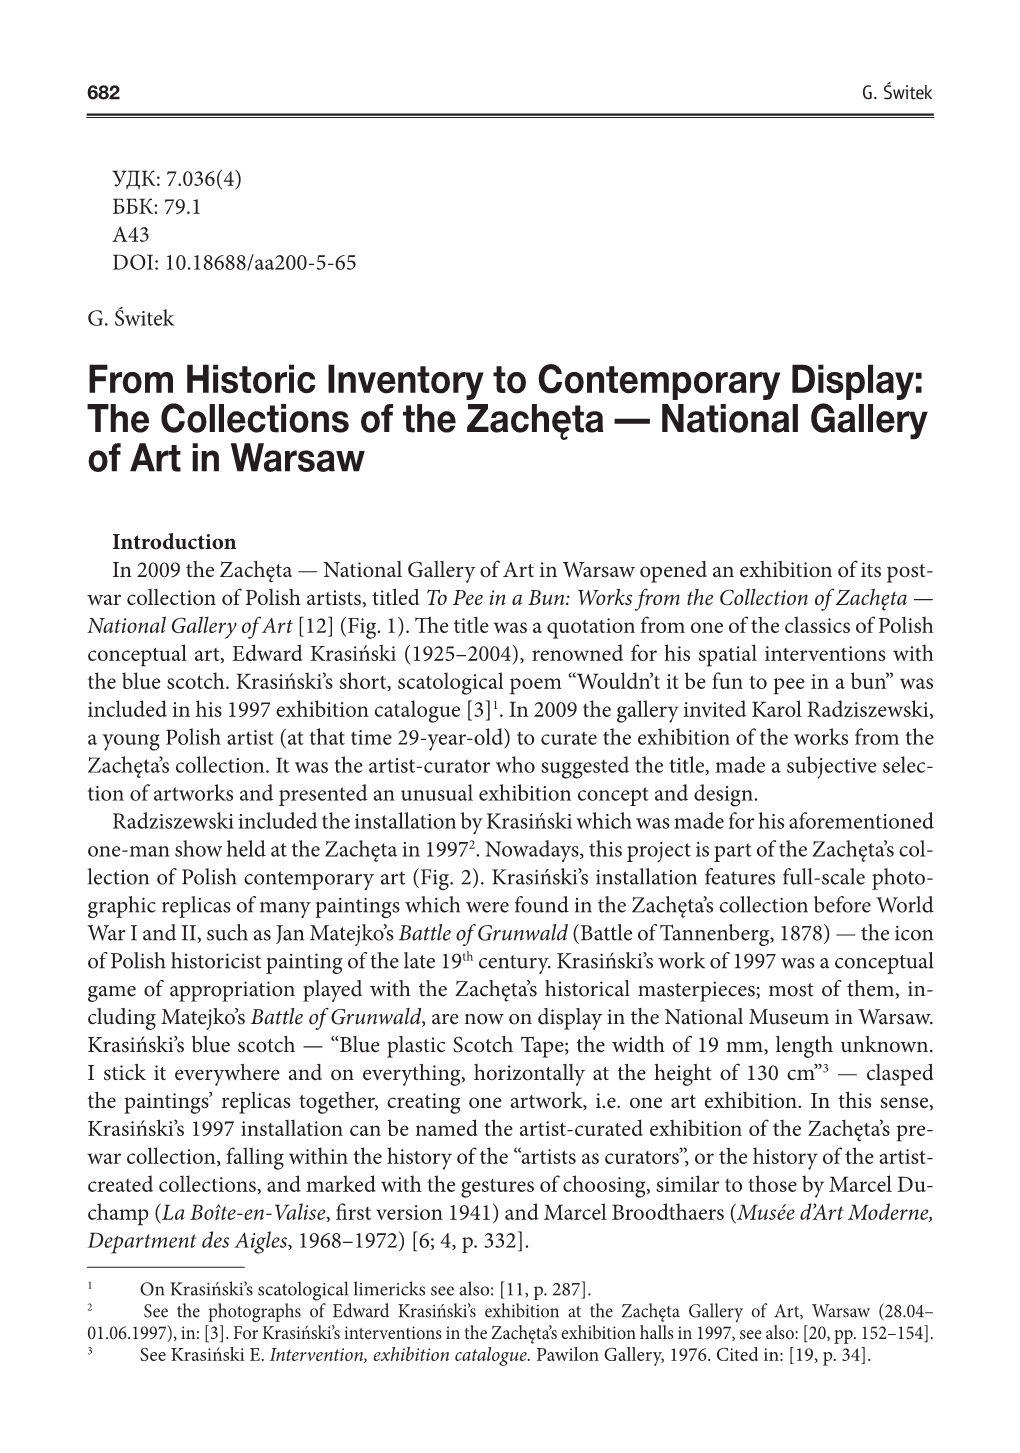 From Historic Inventory to Contemporary Display: the Collections of the Zachęta — National Gallery of Art in Warsaw